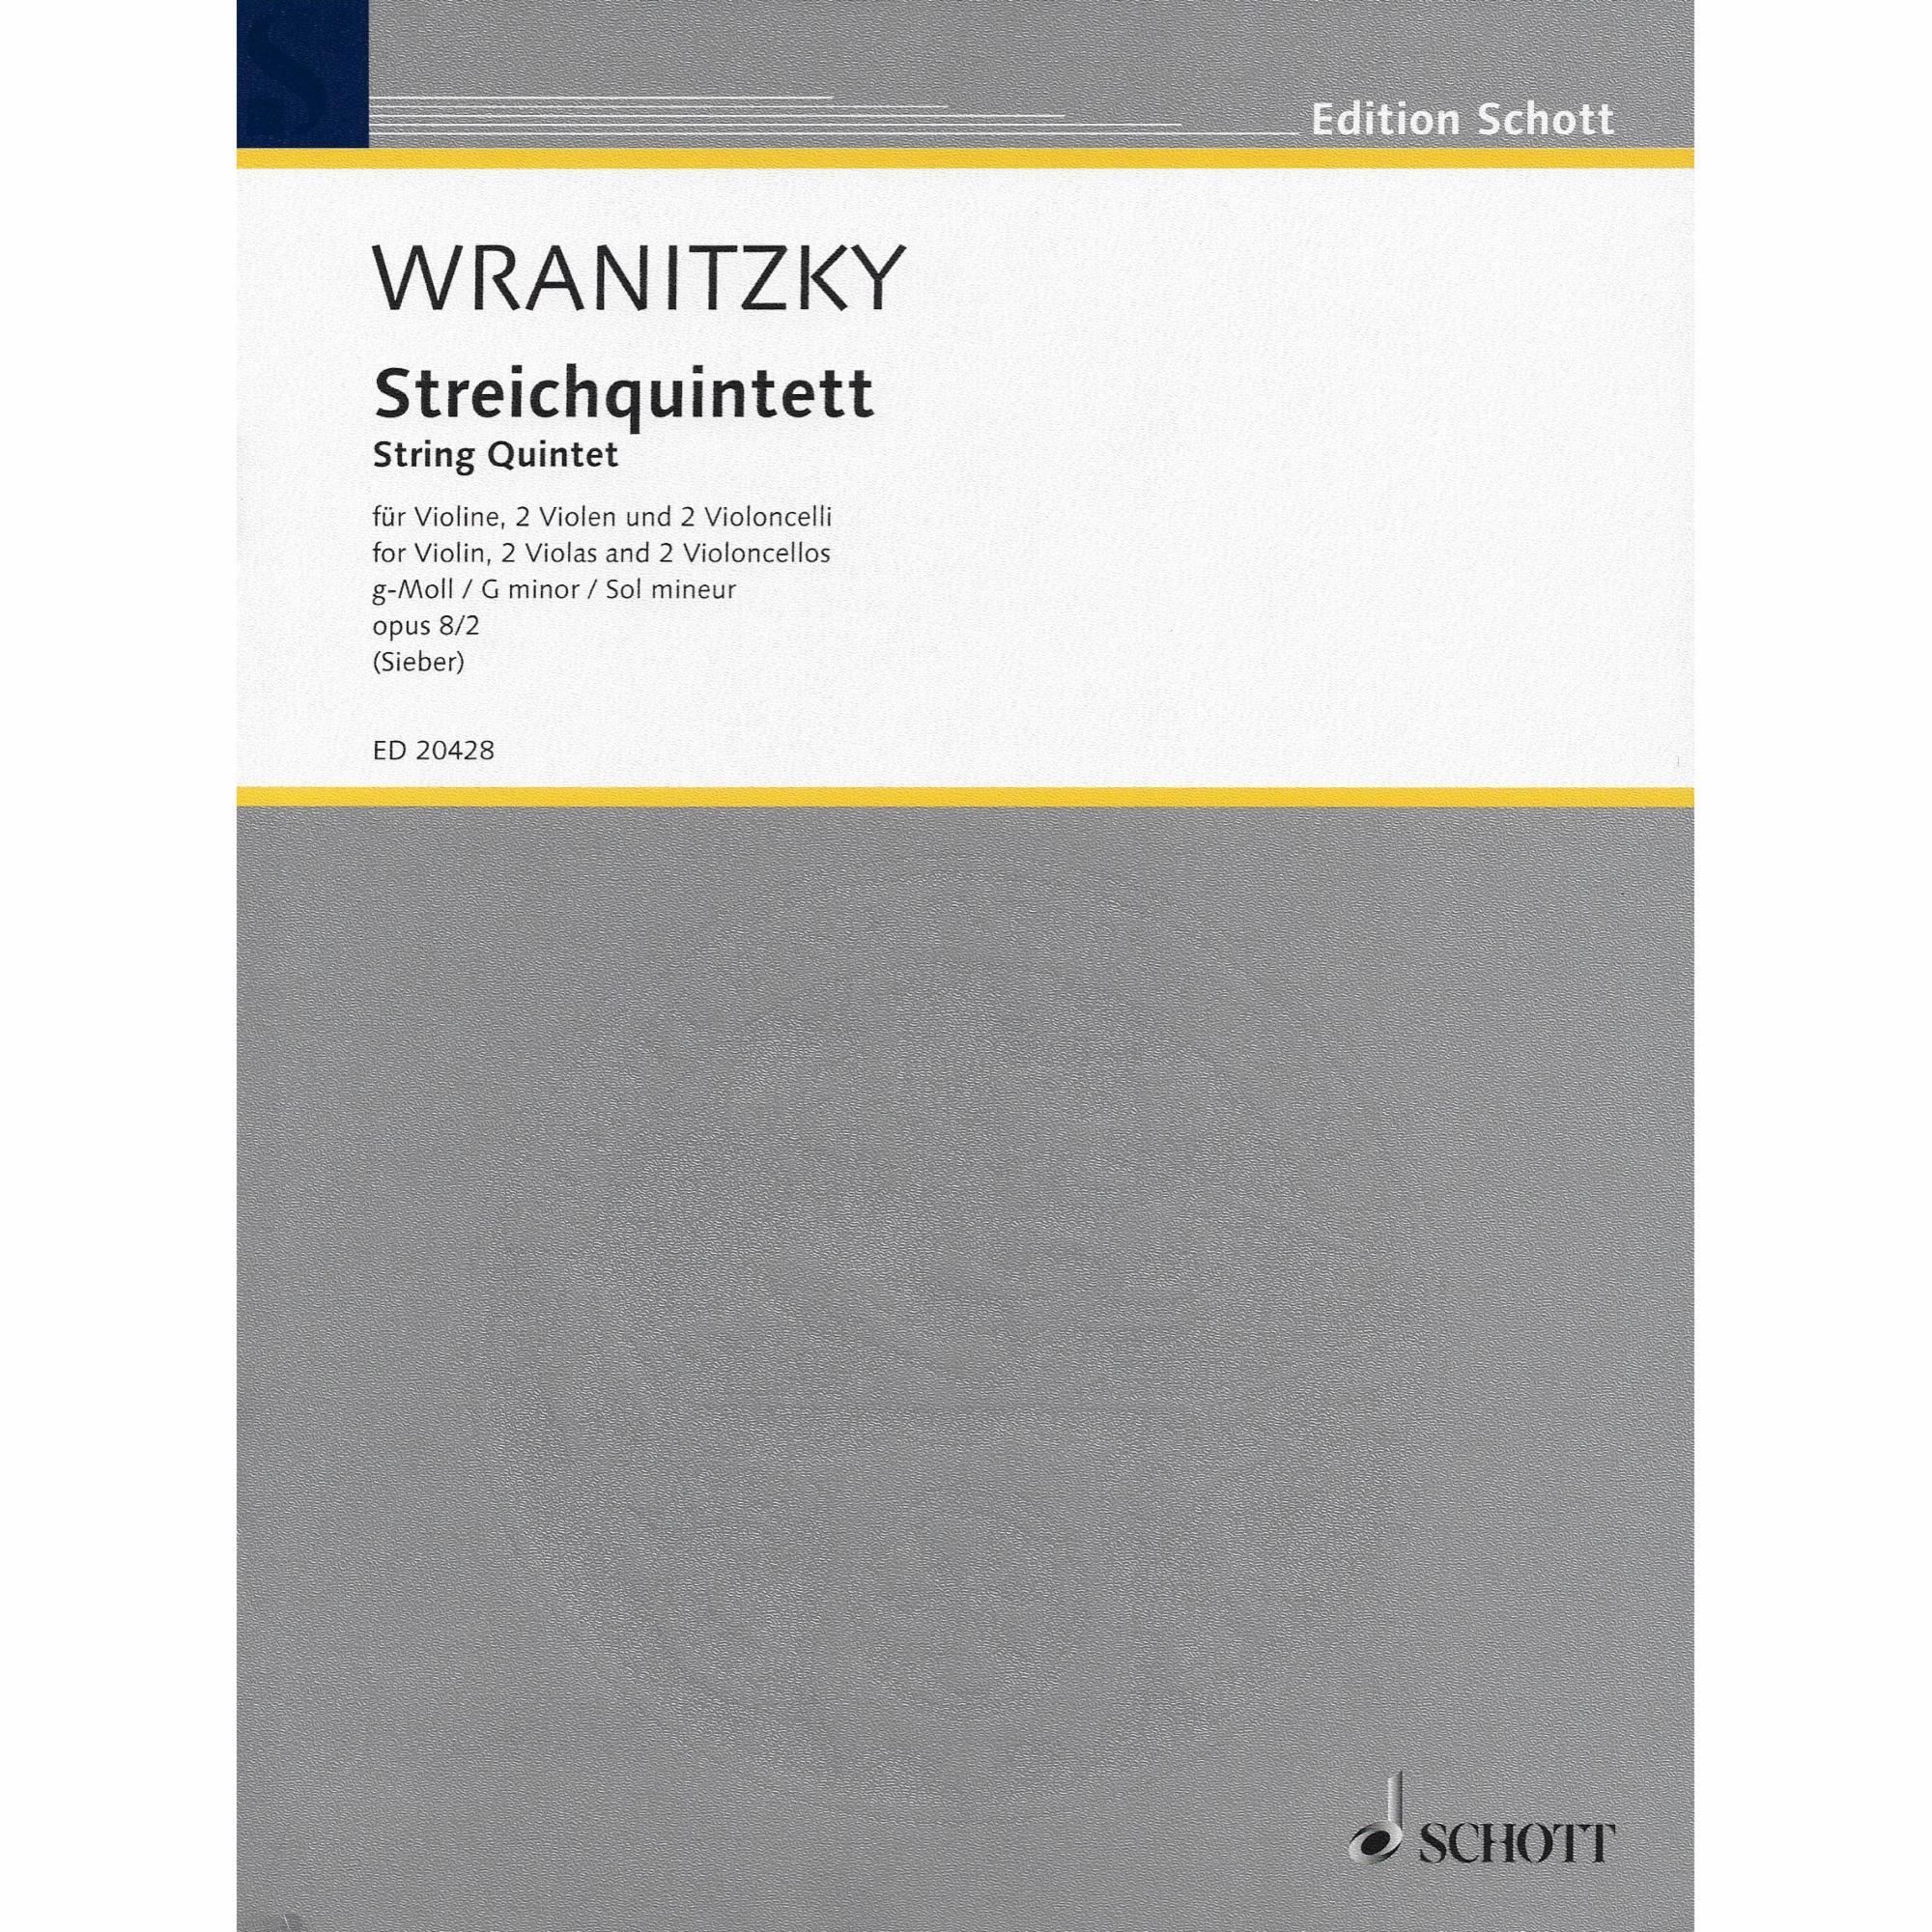 Wranitzky -- String Quintet in G Minor, Op. 8, No. 2 for Violin, Two Violas and Two Cellos